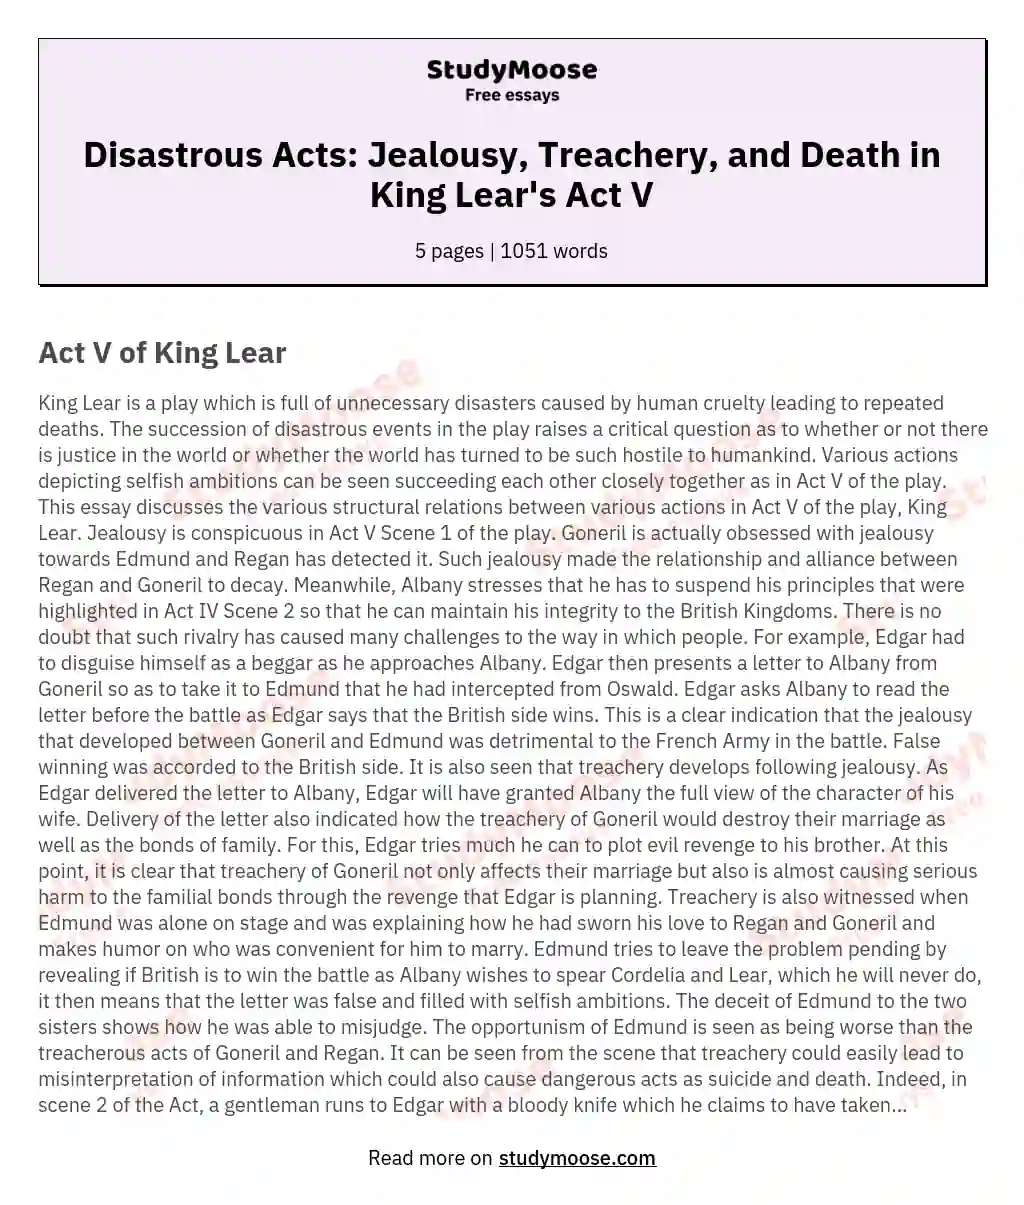 Disastrous Acts: Jealousy, Treachery, and Death in King Lear's Act V essay